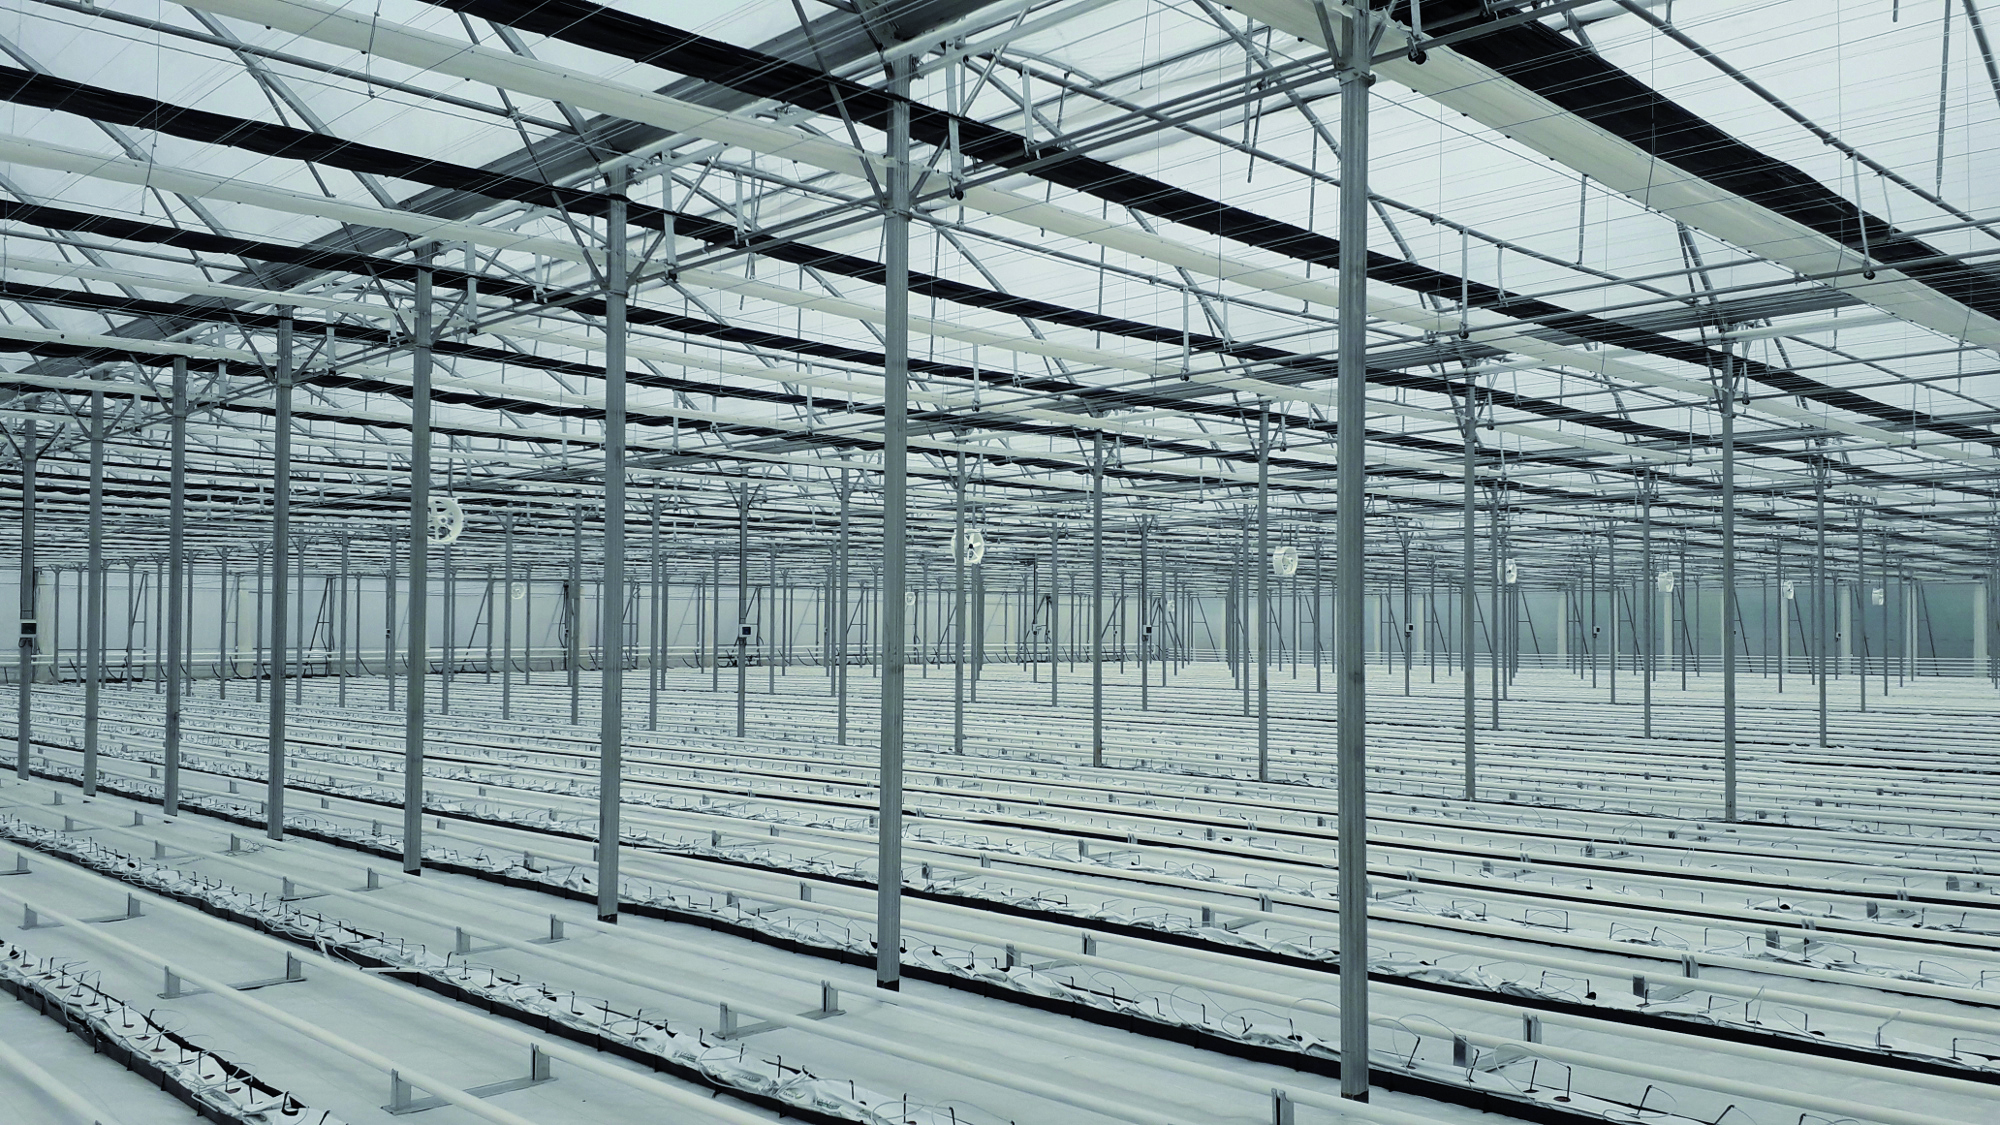 ULMA Agrícola has installed more than 5 hectares of greenhouses in Central Asia